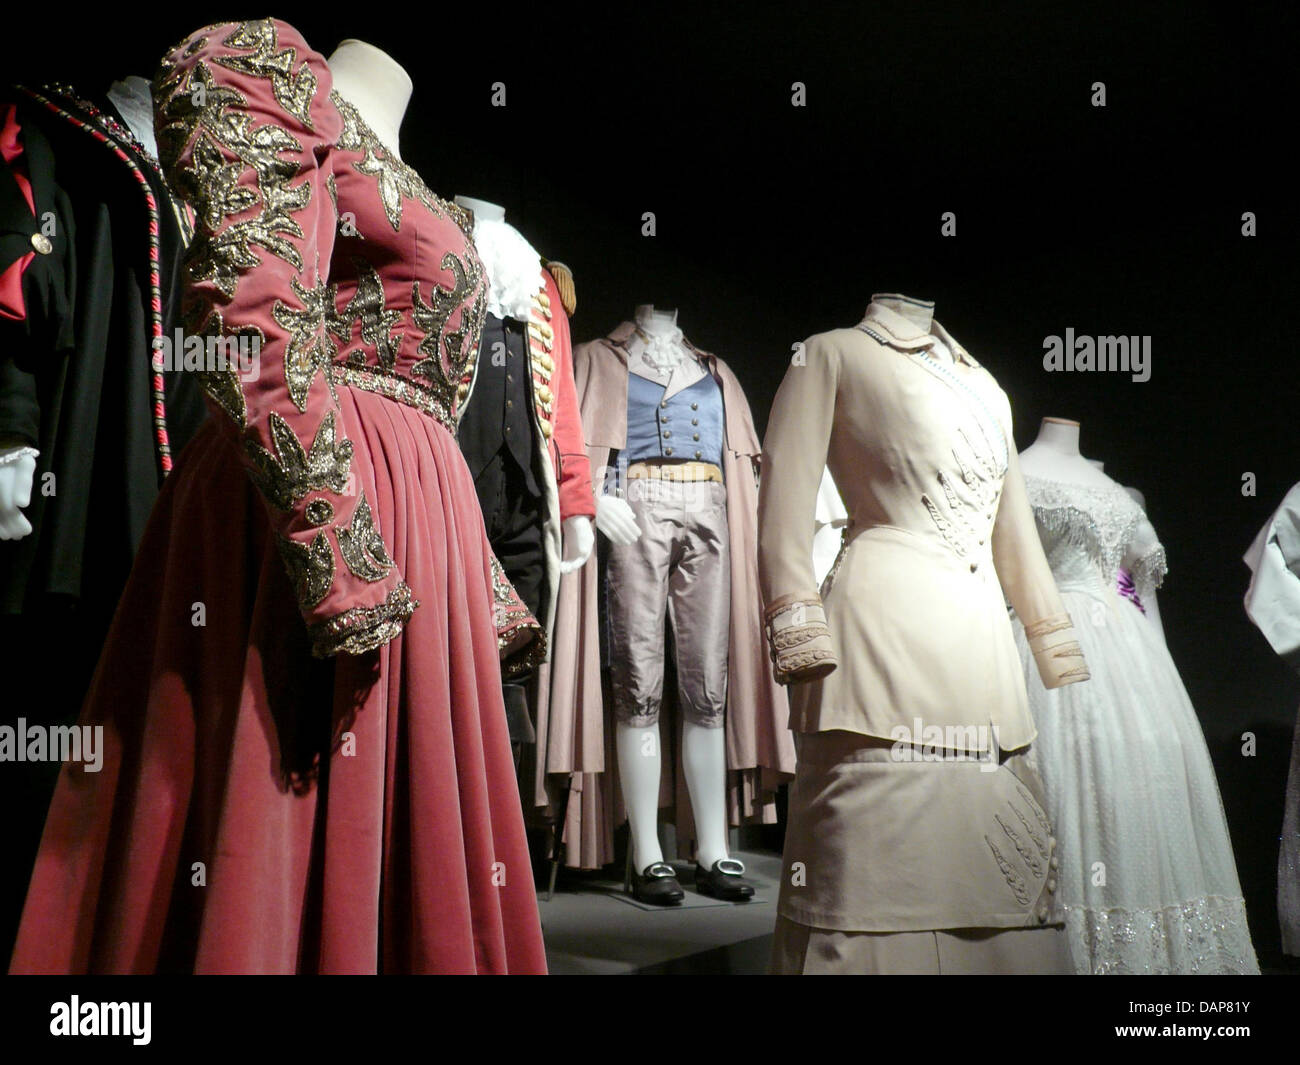 Visitors can admire original costumes, which were worn by stars like Audrey Hepburn and Anita Ekberg during filming in the Italian Hollywood, in the exhibition 'Cinecittà si mostra' in the film city 'Cinecitta' in Rome, Italy, 11 July 2011. The film city, location for numerous famous movies, was founded in the 1950's. Photo: Monika Bormeth Stock Photo